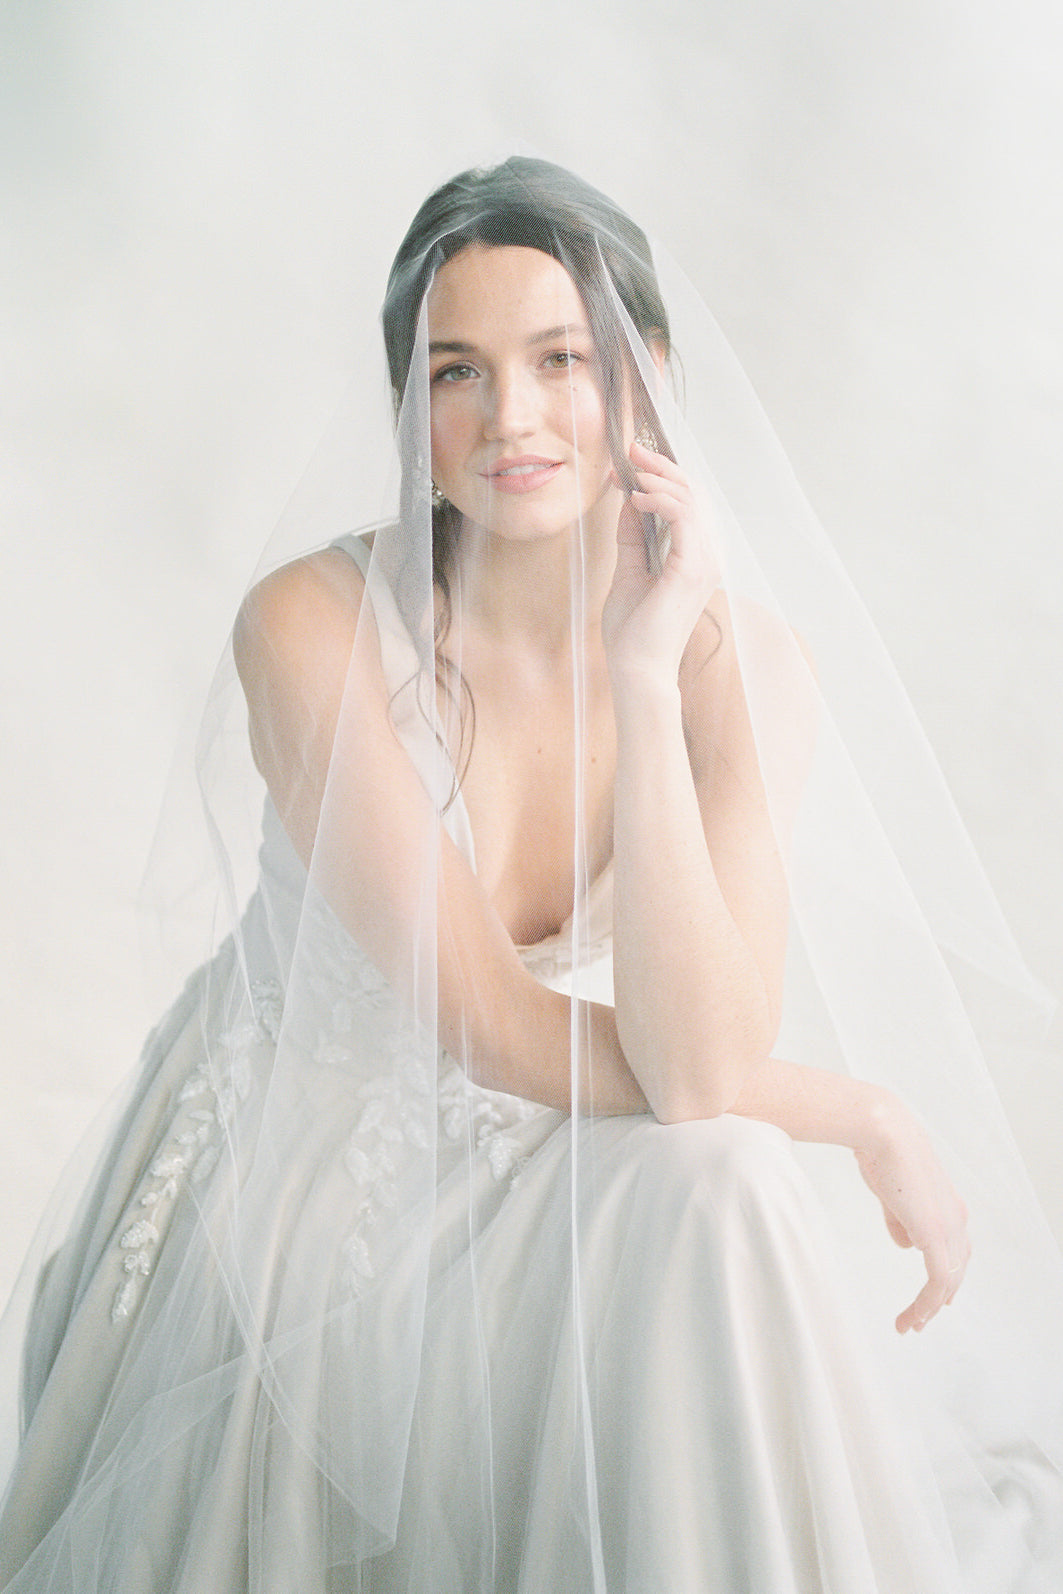 One Blushing Bride Two Tier Drop Wedding Veil, Long Veil with Blusher, Double Layer White / Chapel 90